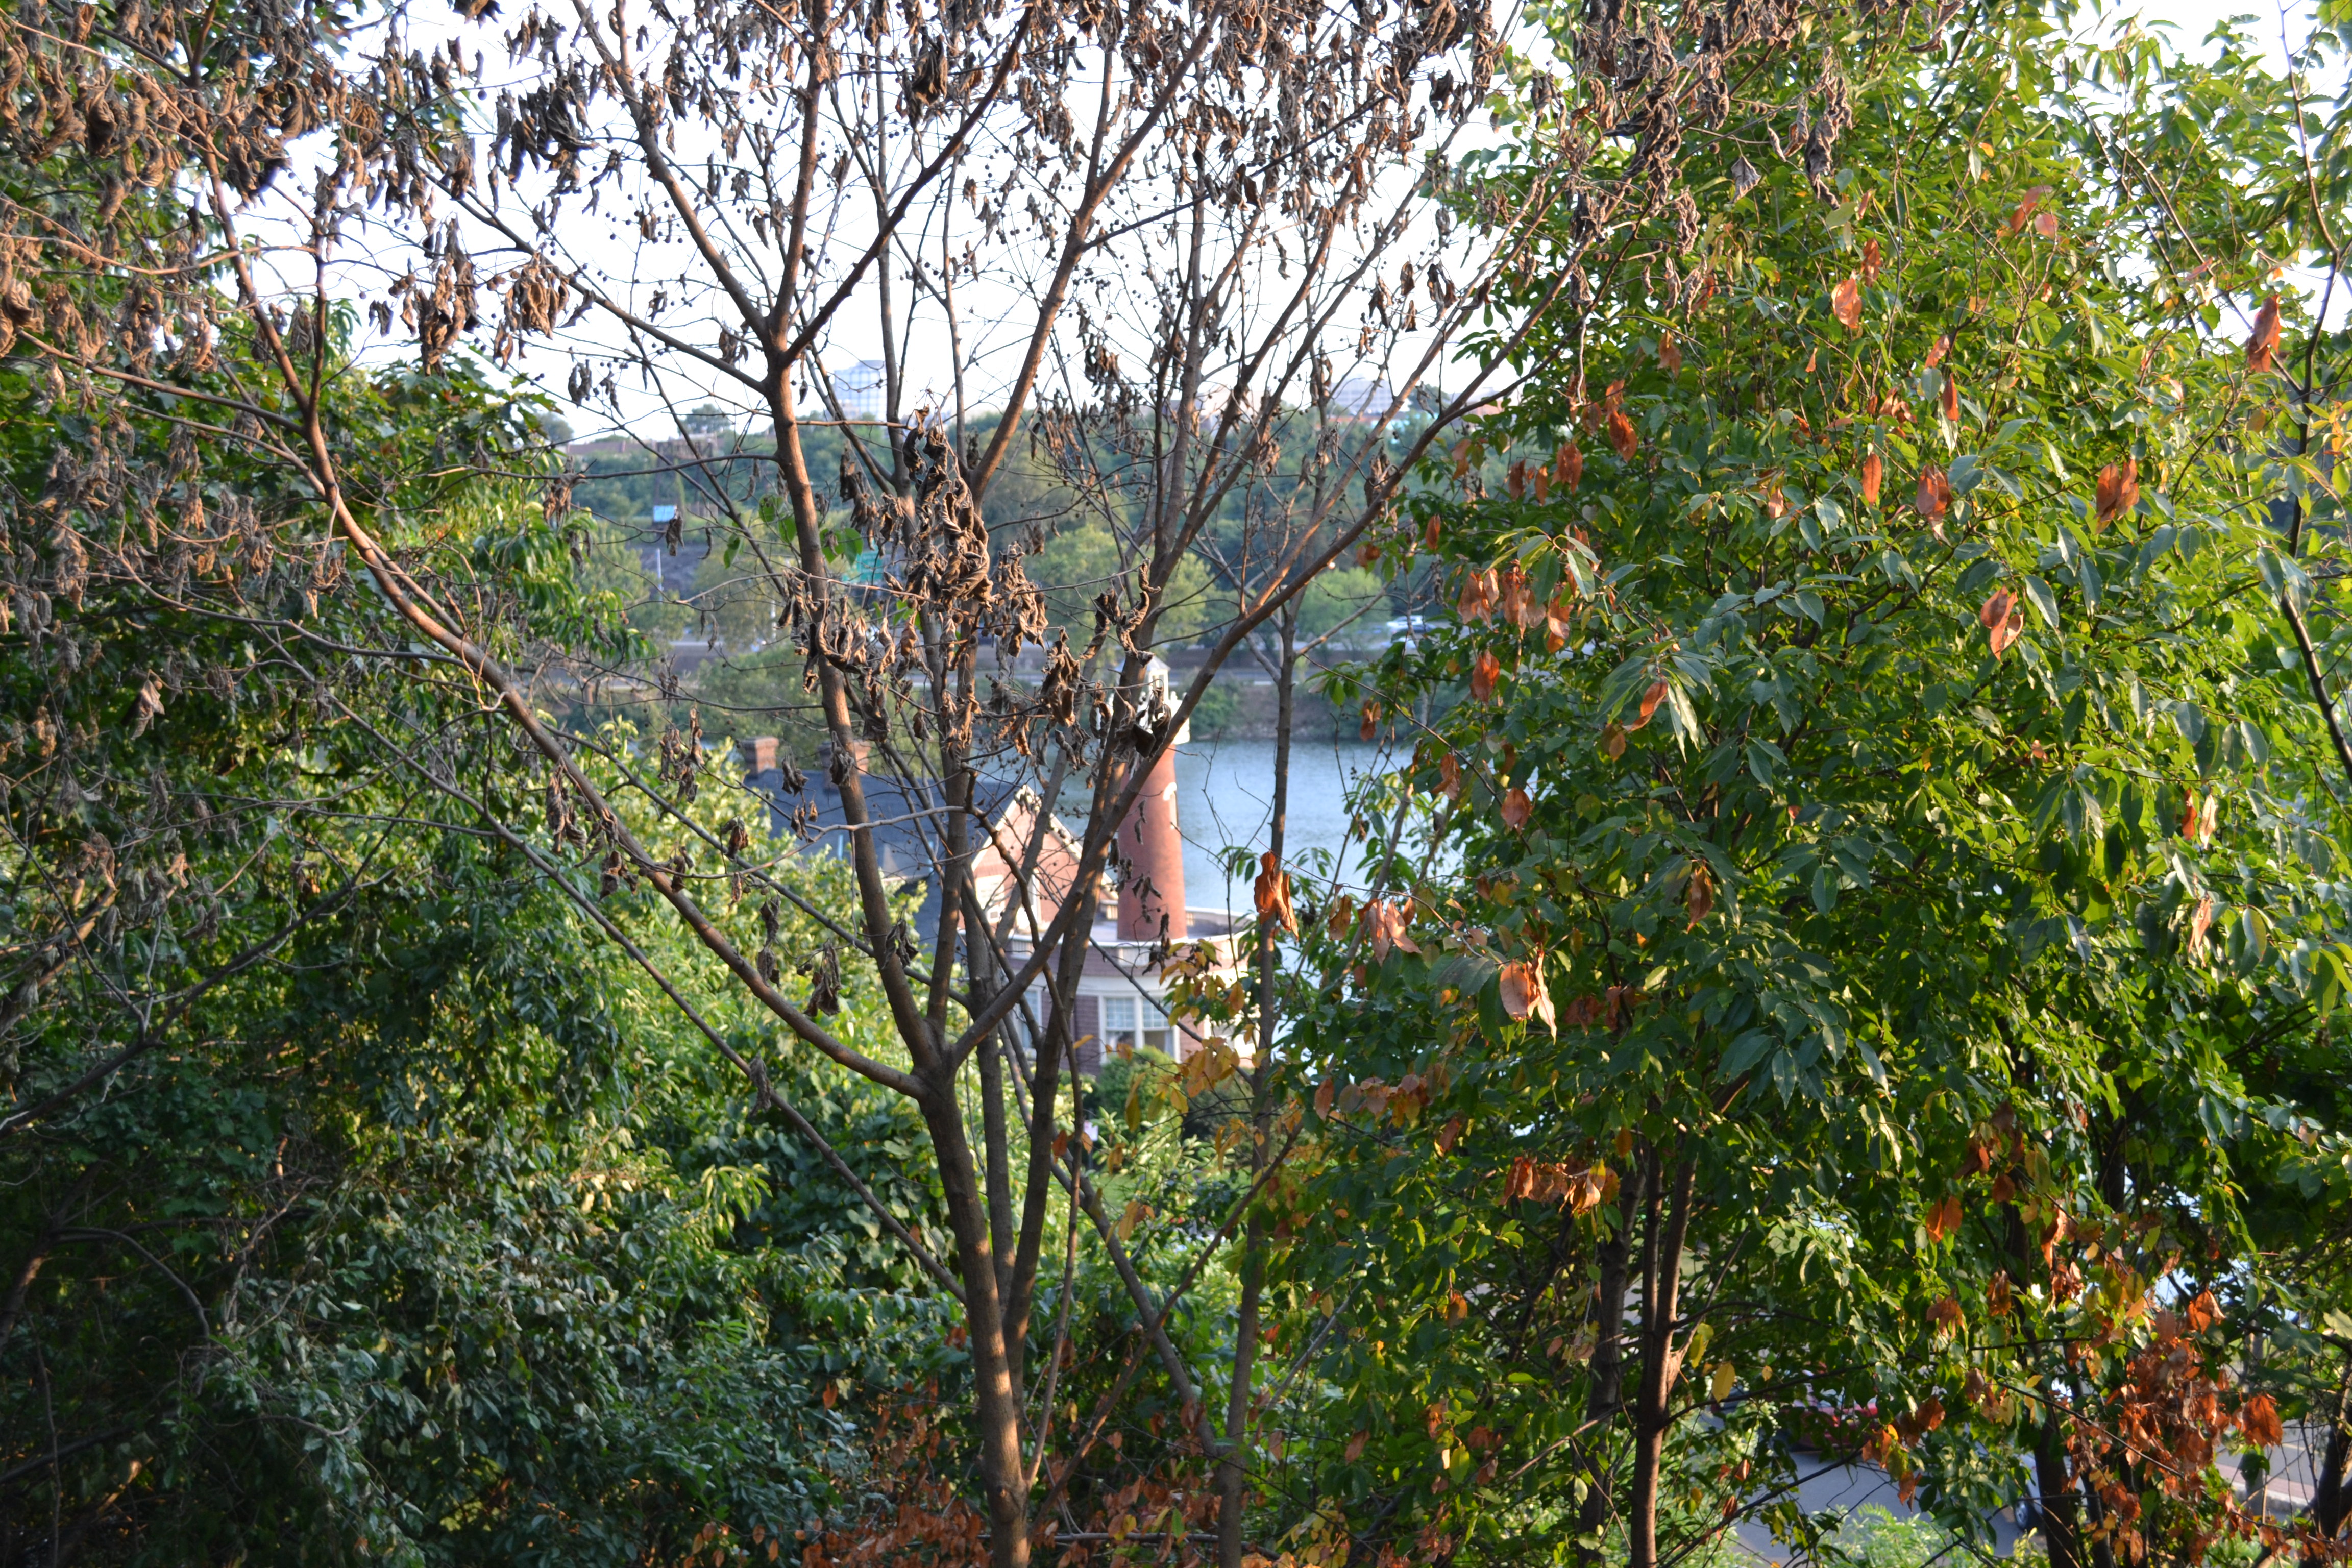 The gazebo was built to overlook the river, but at the moment overgrown trees block the view